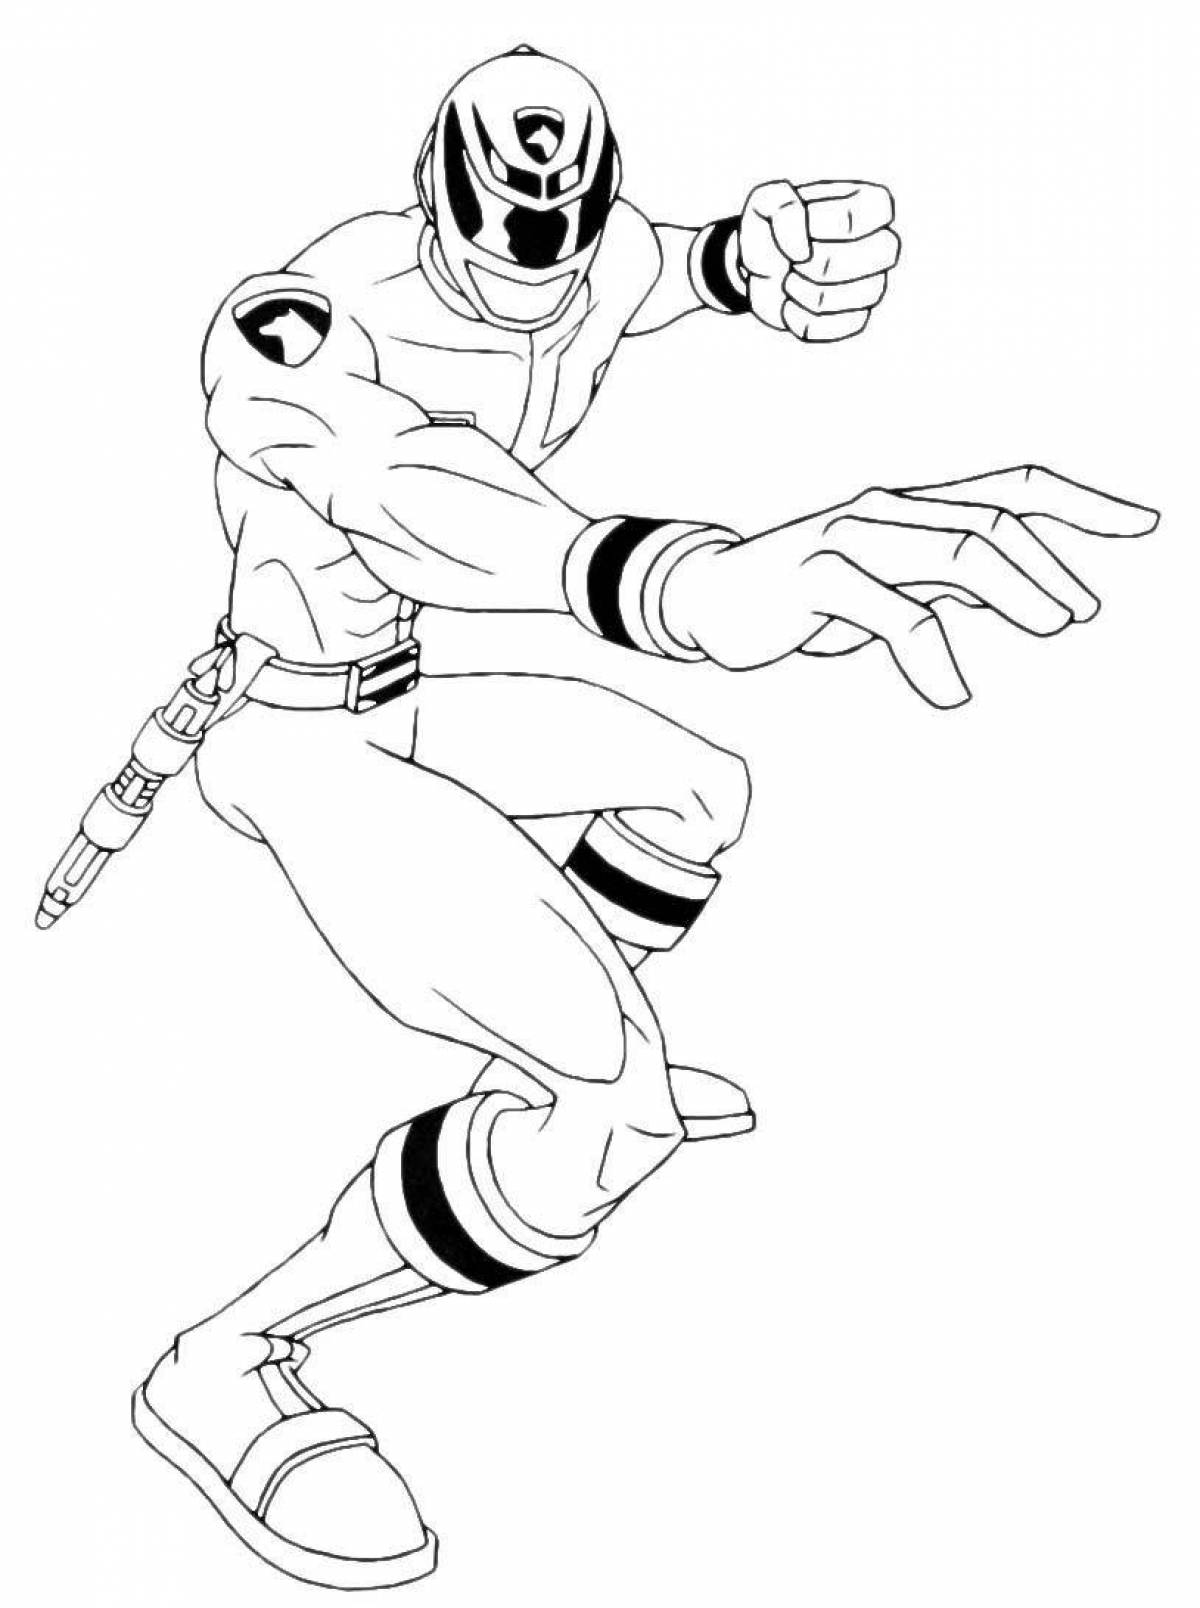 Charming fighters coloring page